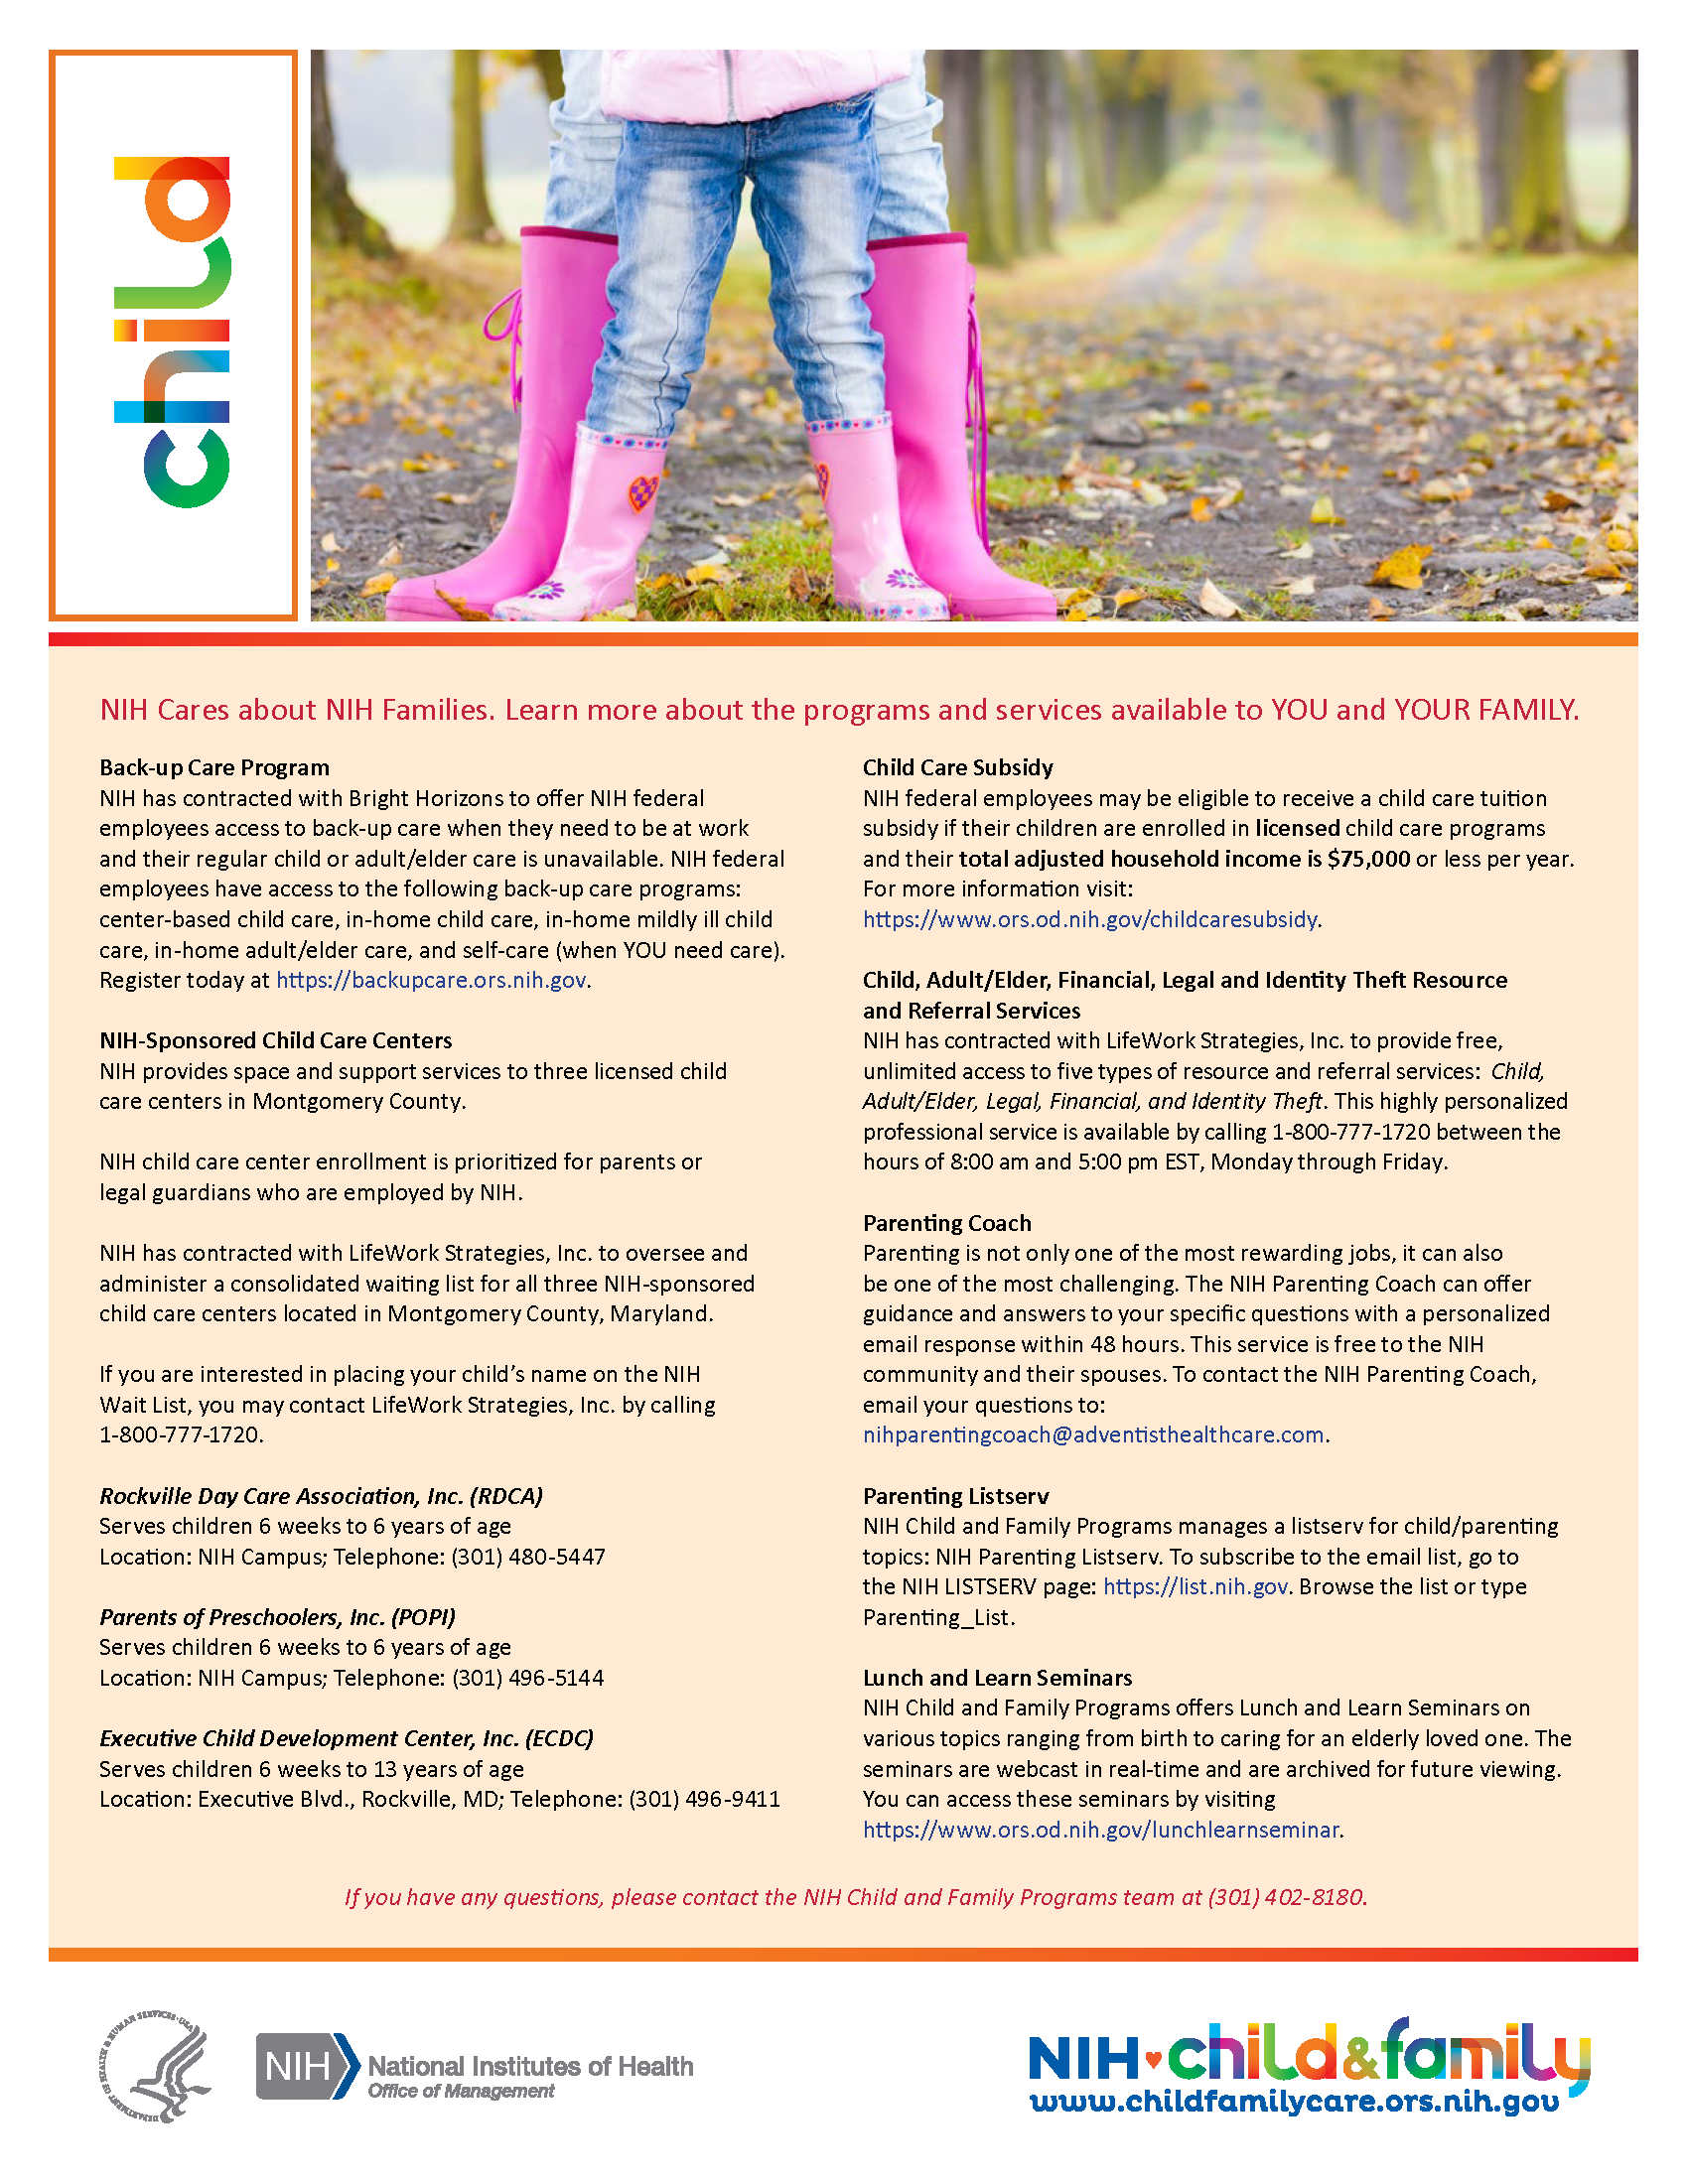 Child Care Resources Flyer